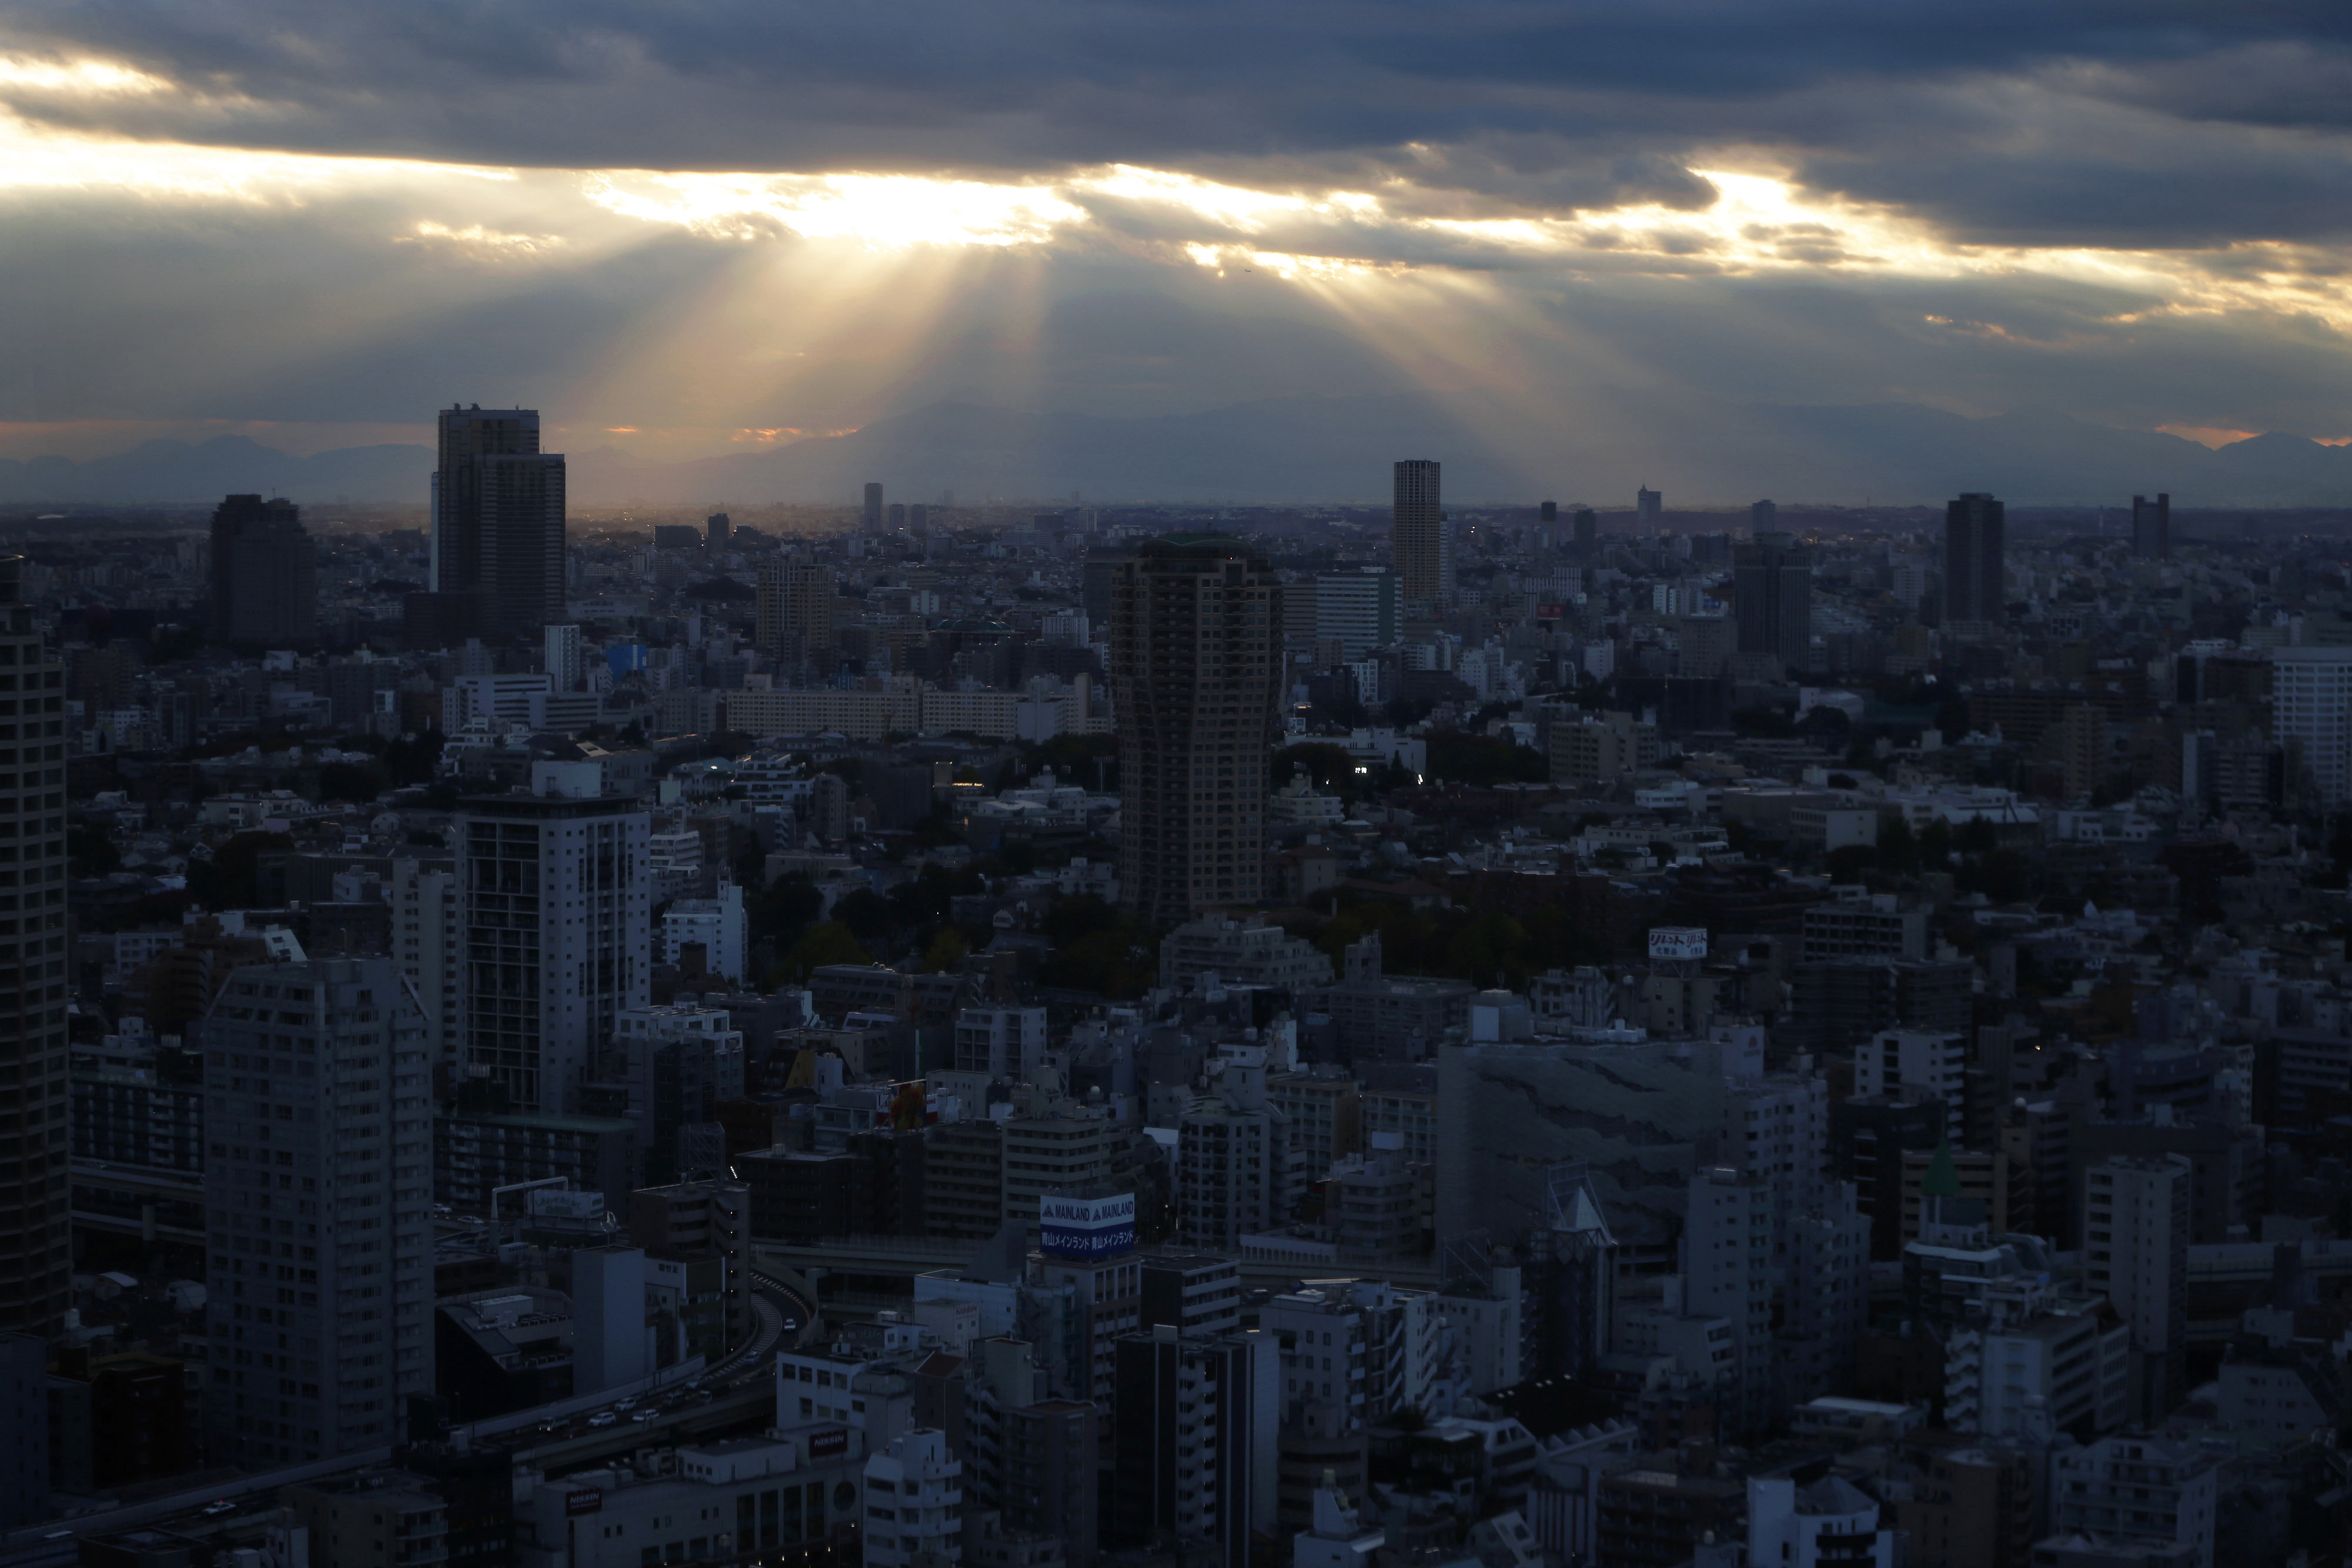 Tokyo is the world's second-riskiest city to live in due to its high exposure to man-made and natural threats, according to Lloyd's of London. | BLOOMBERG